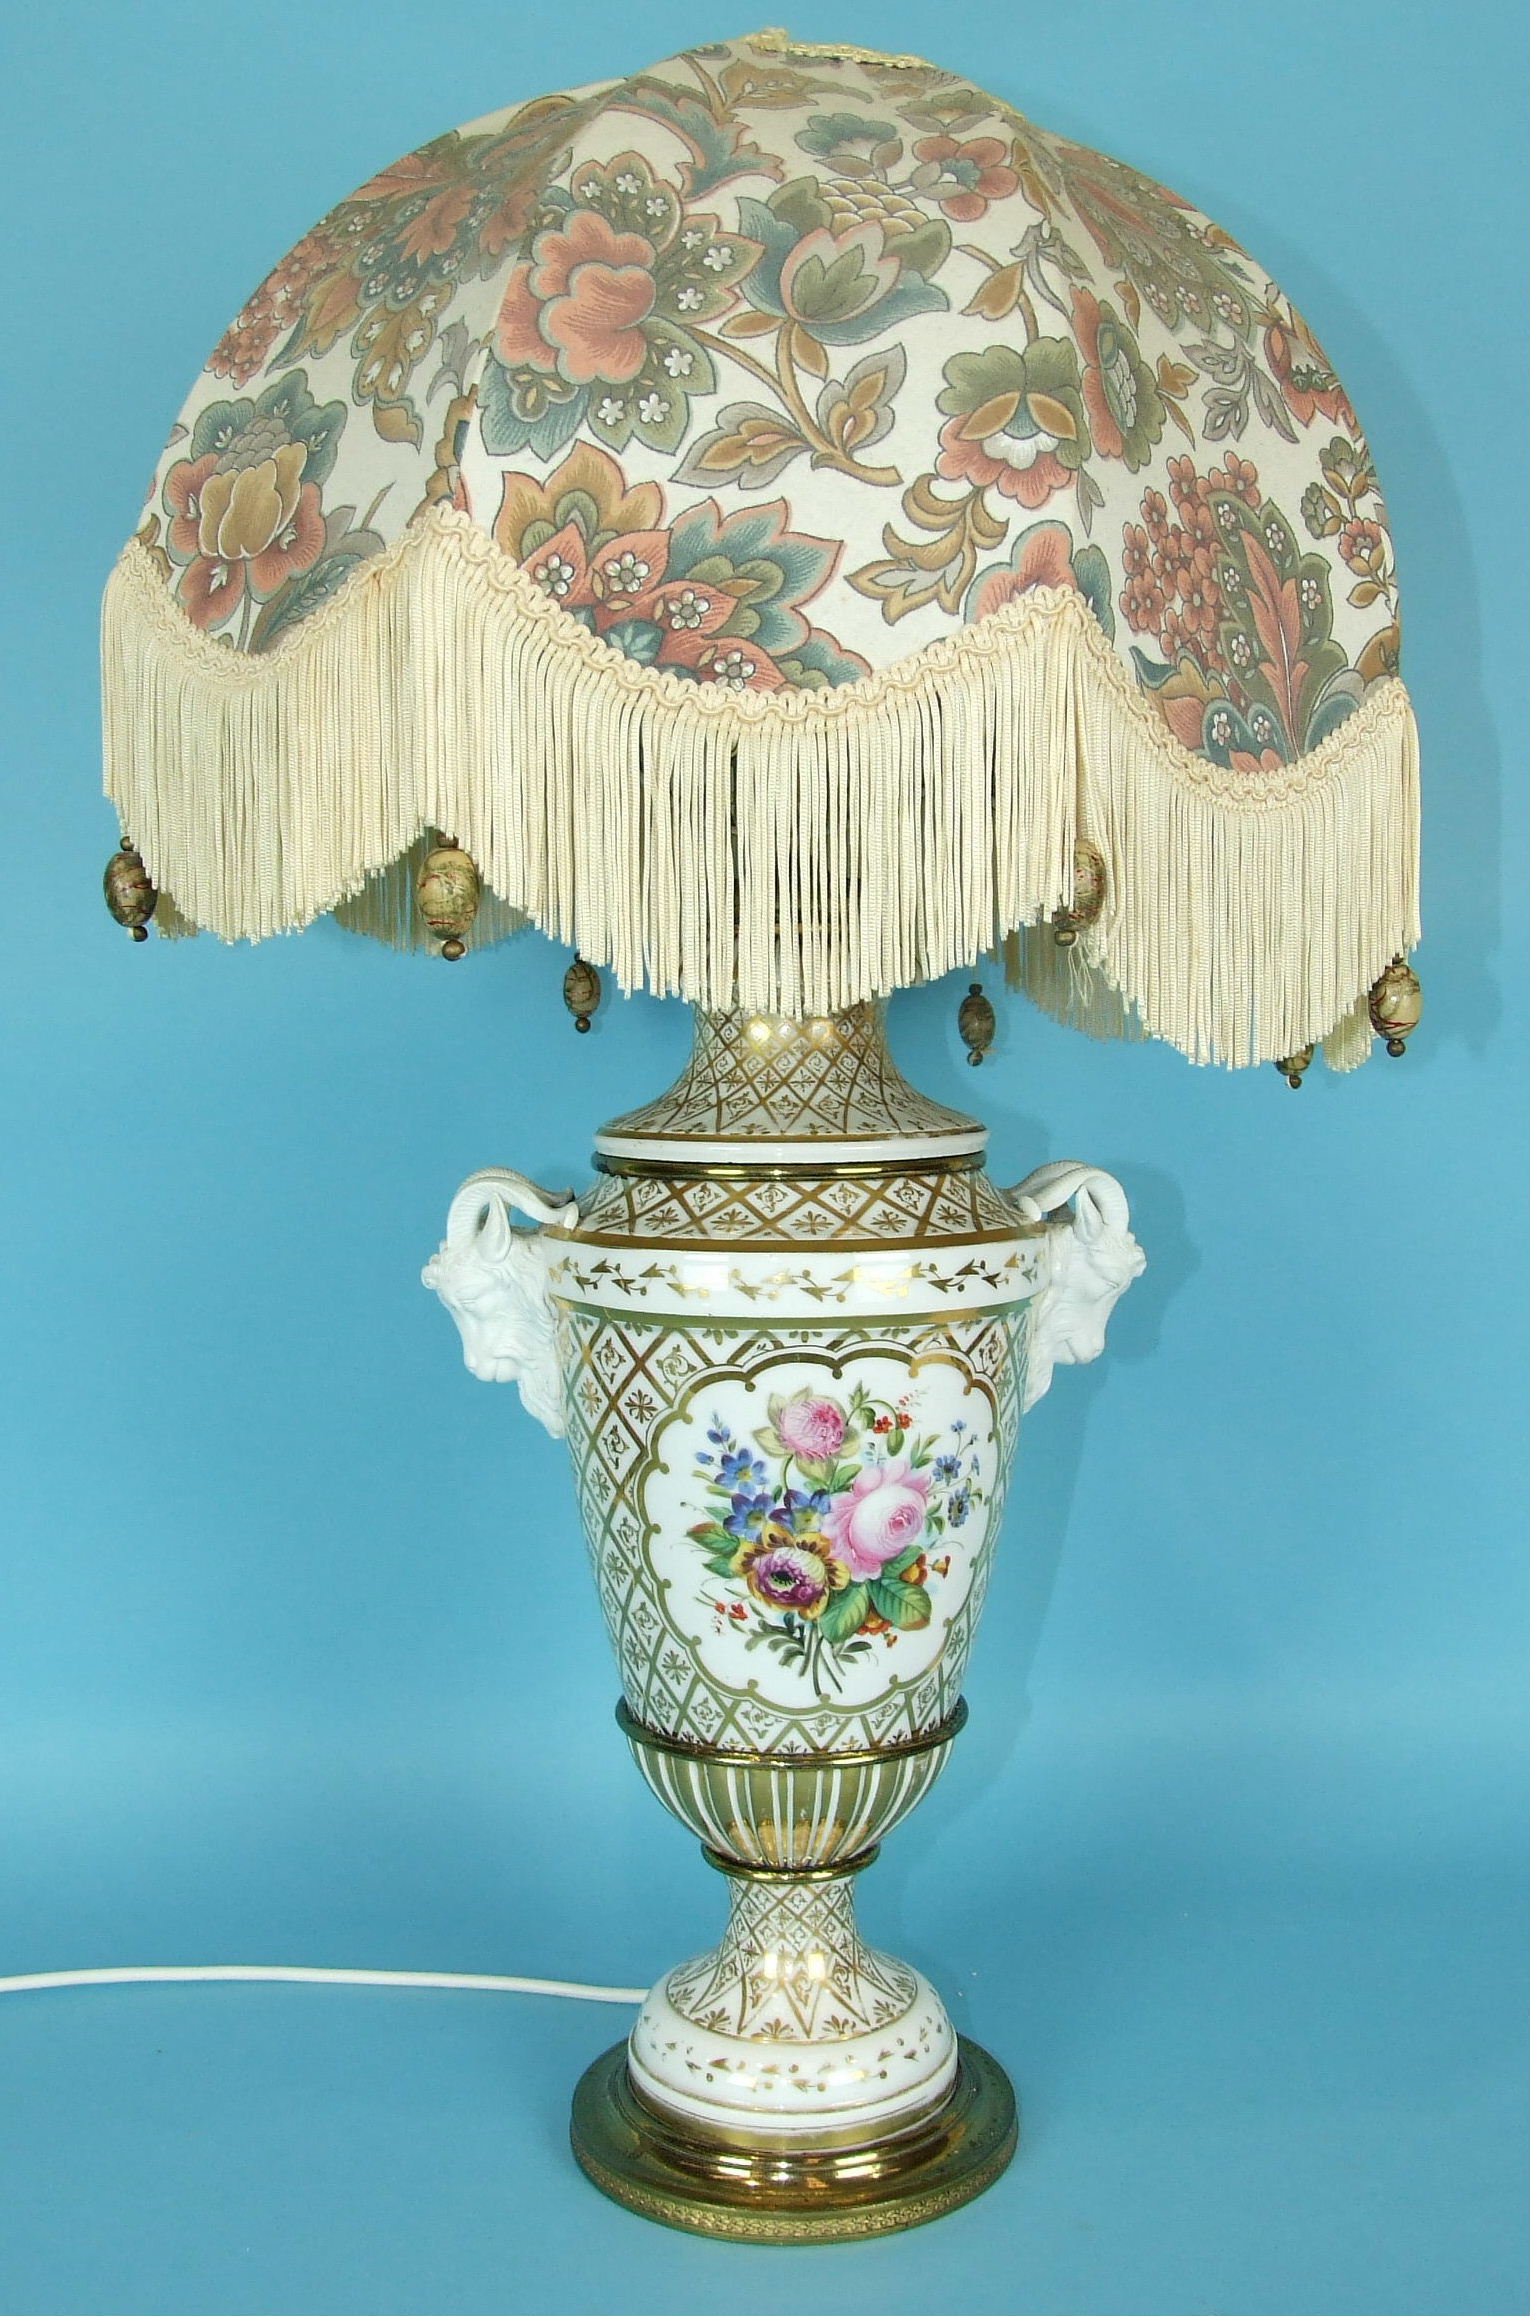 A large 19th century French porcelain vase decorated with panels of flowers on a white and gilt